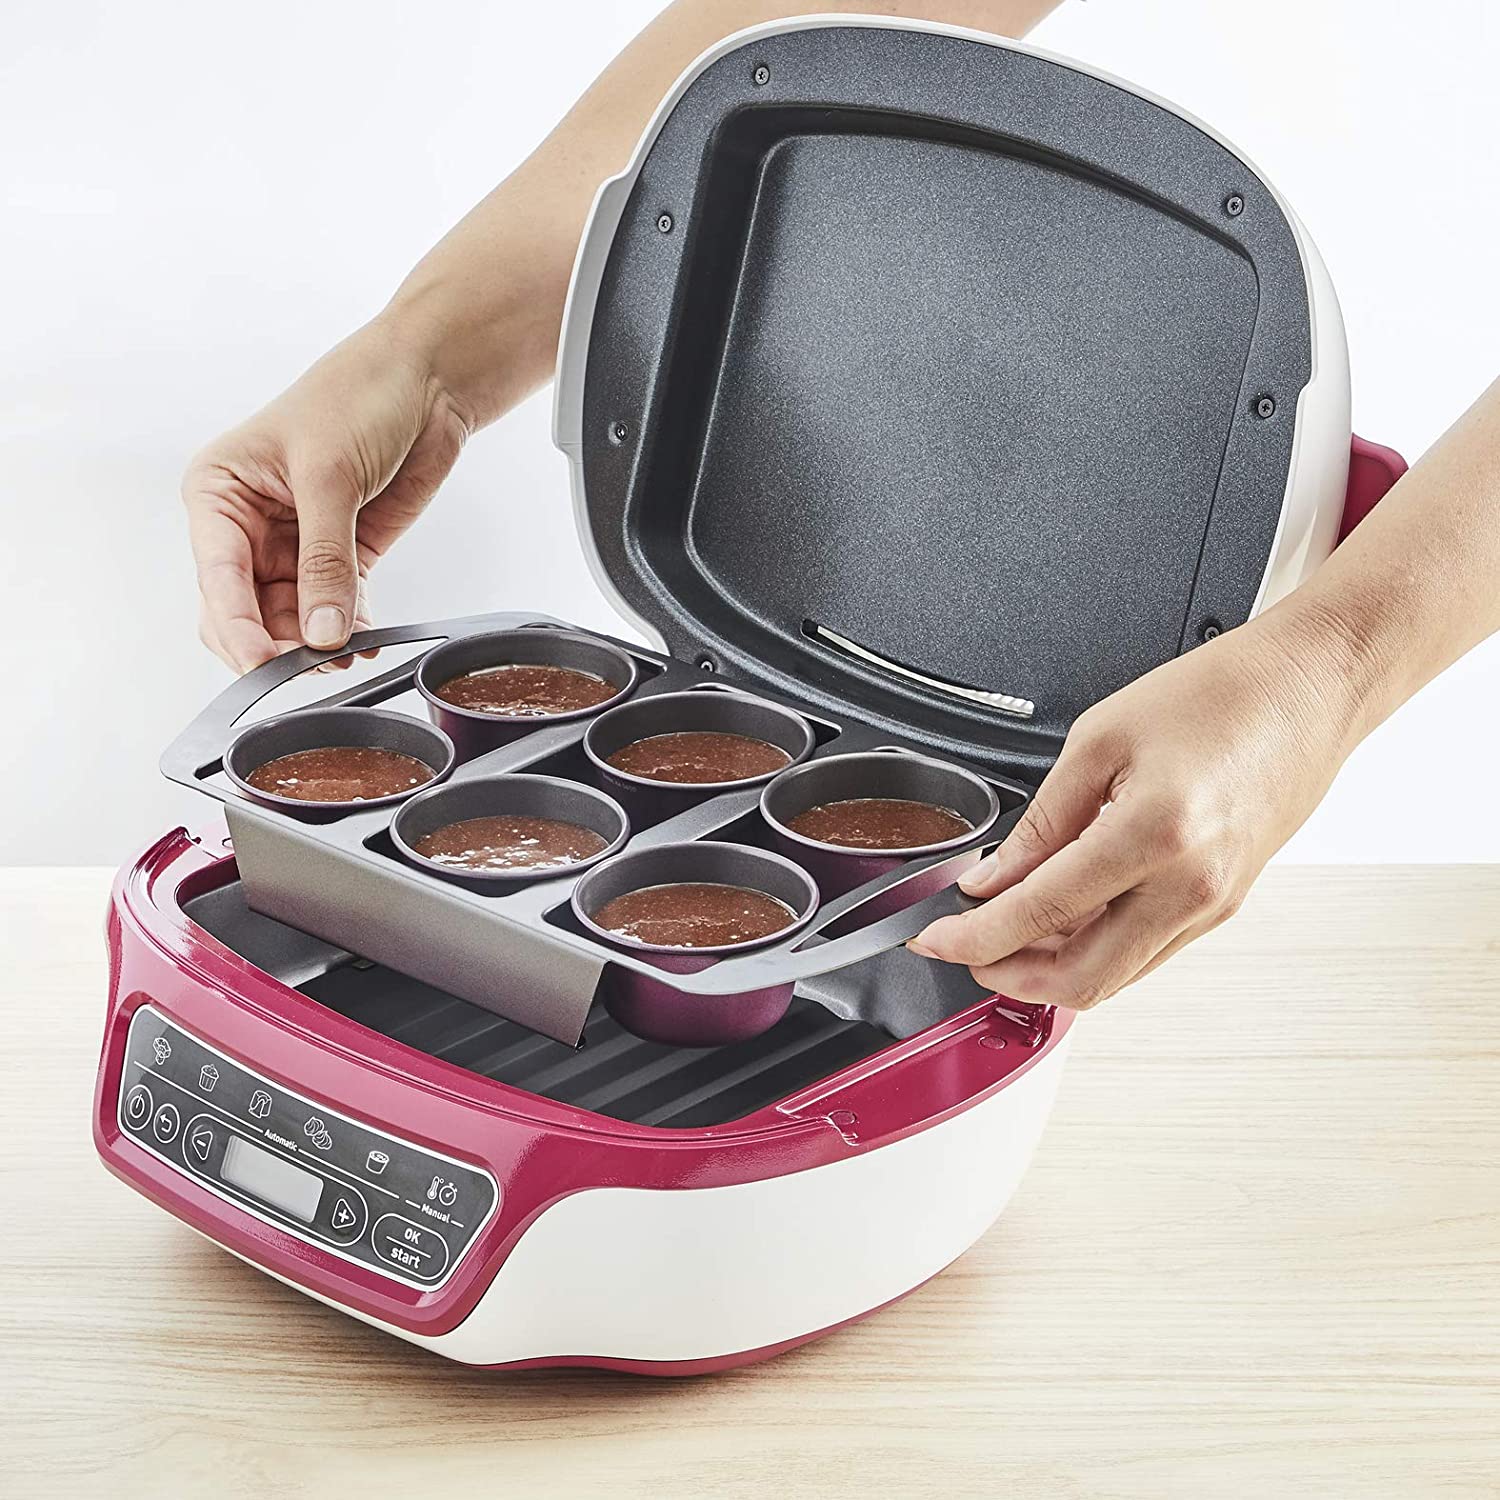 TEFAL Cake Factory Délices Mini Oven (DRAWN 18.09.21) – Bounty